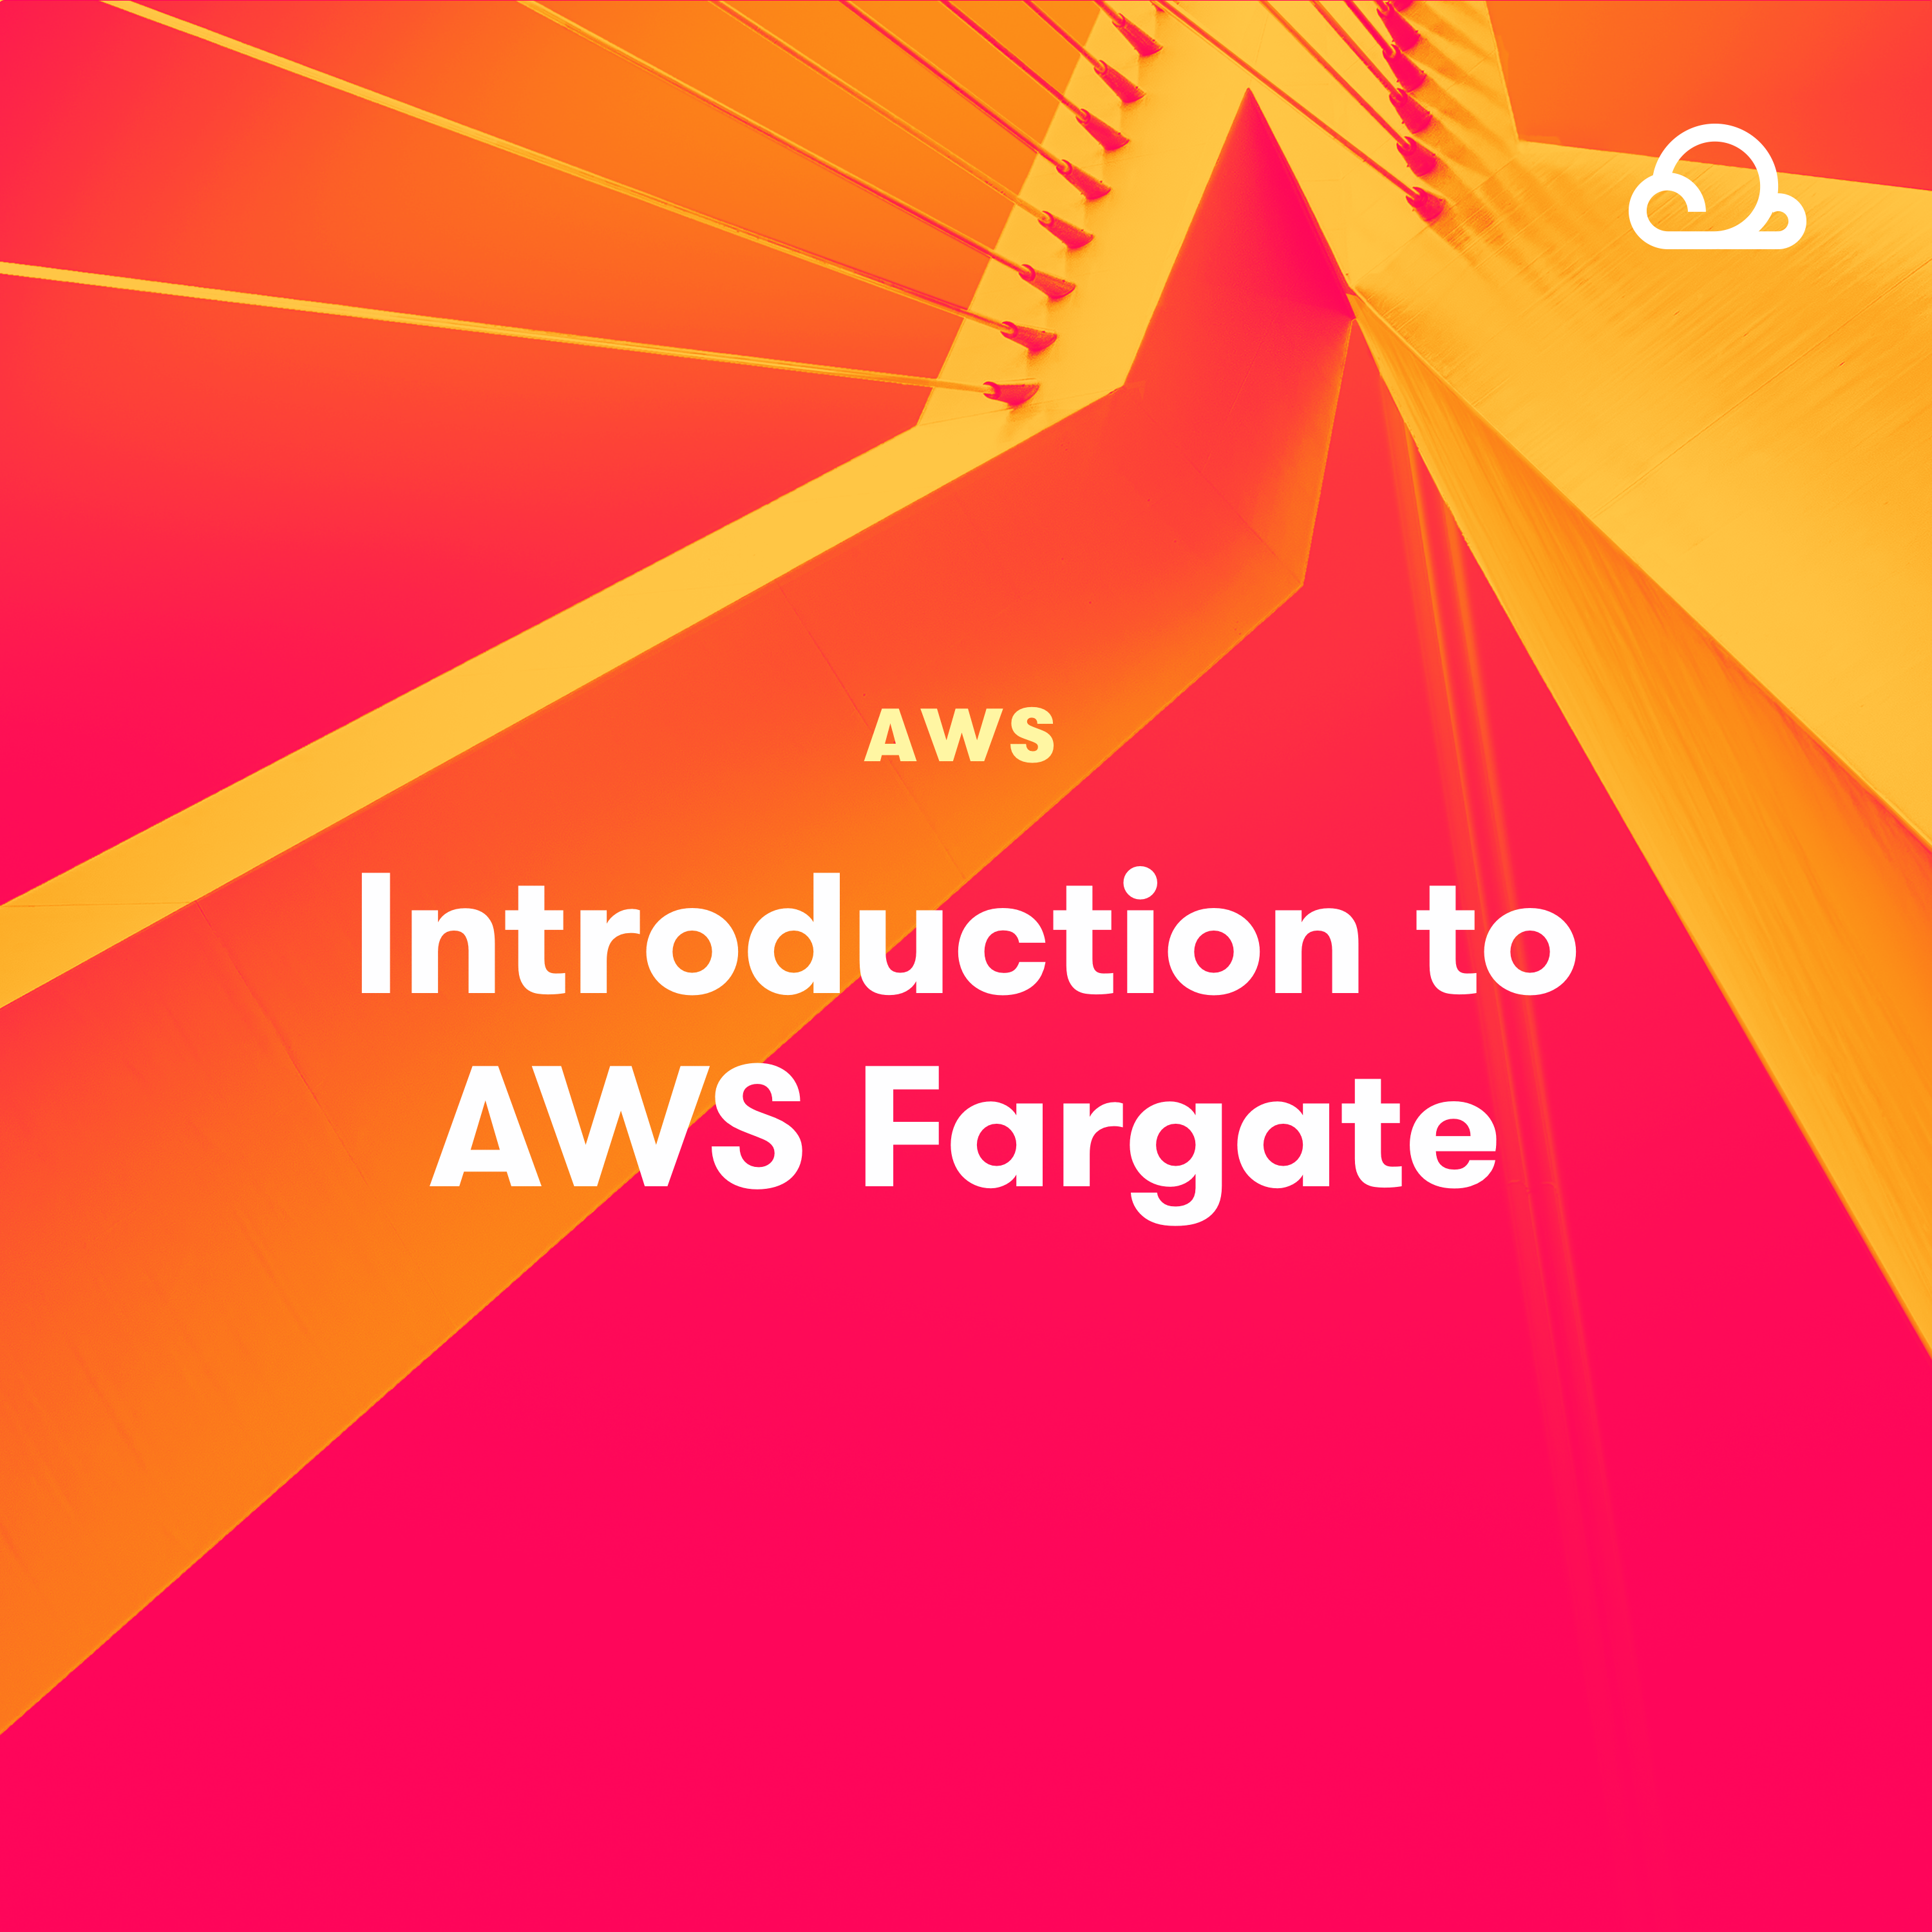 Introduction to AWS Fargate